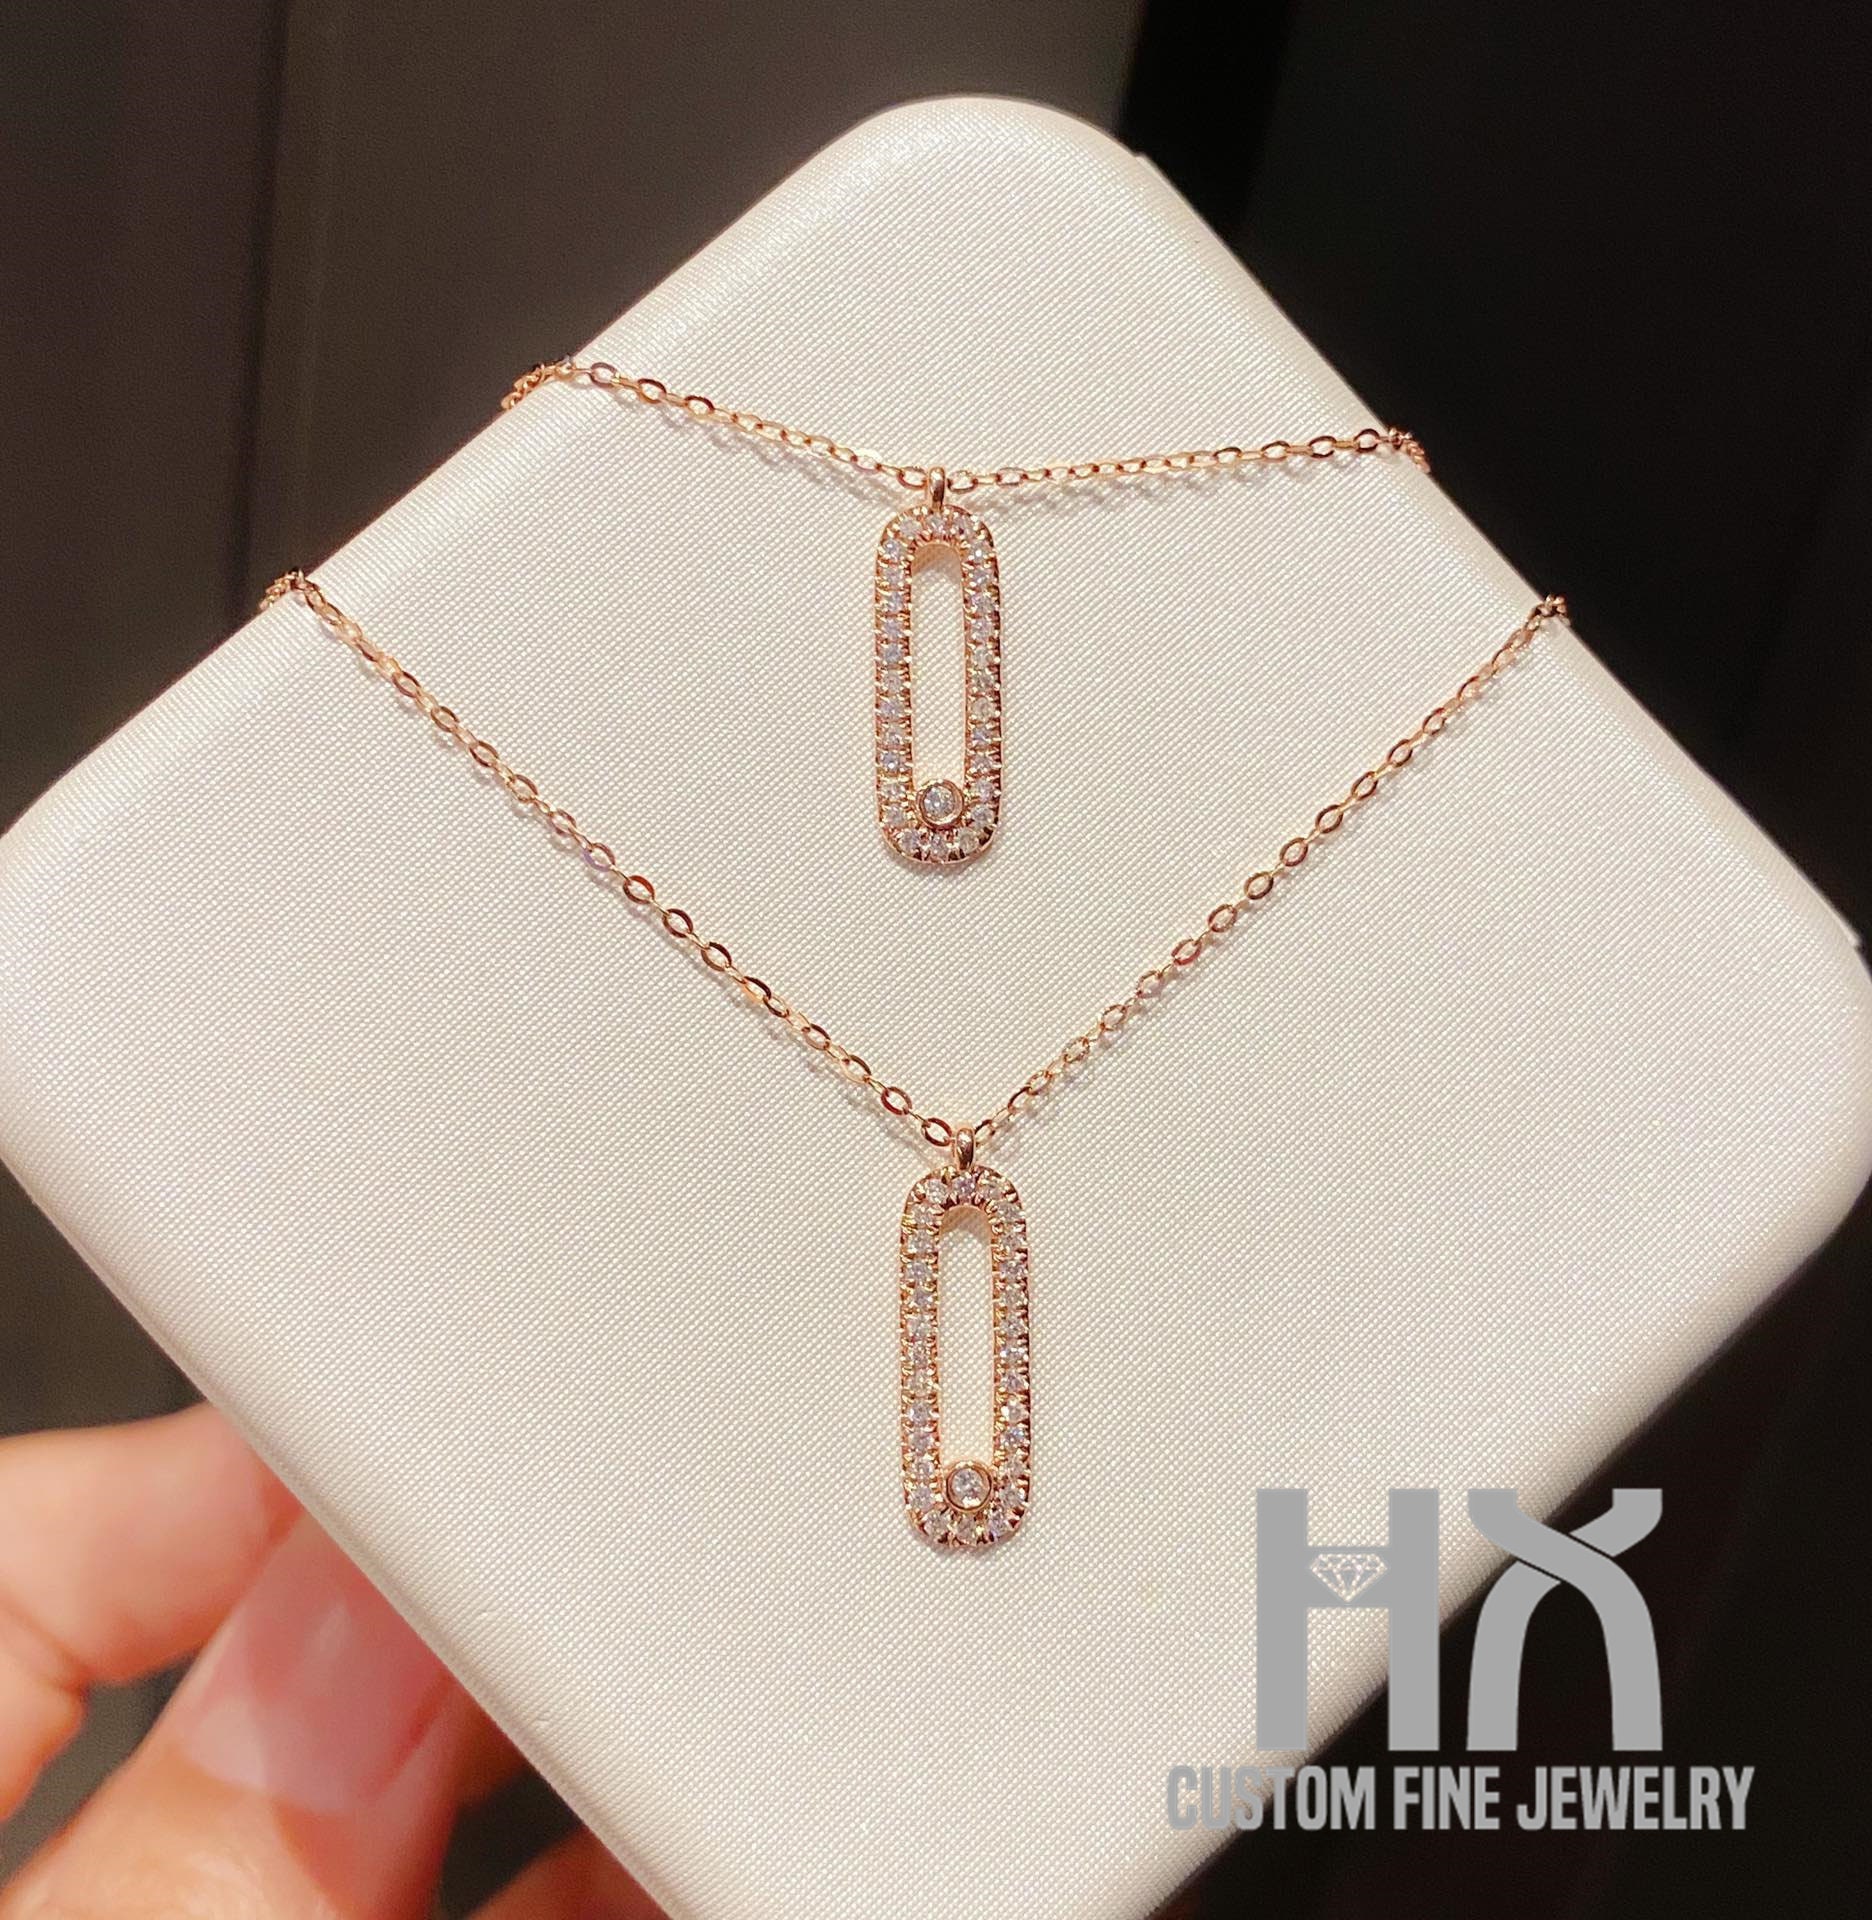 Solid 18K Gold Diamond Oval Shape Pendant Necklace/Custom Jewelry Gift For Her